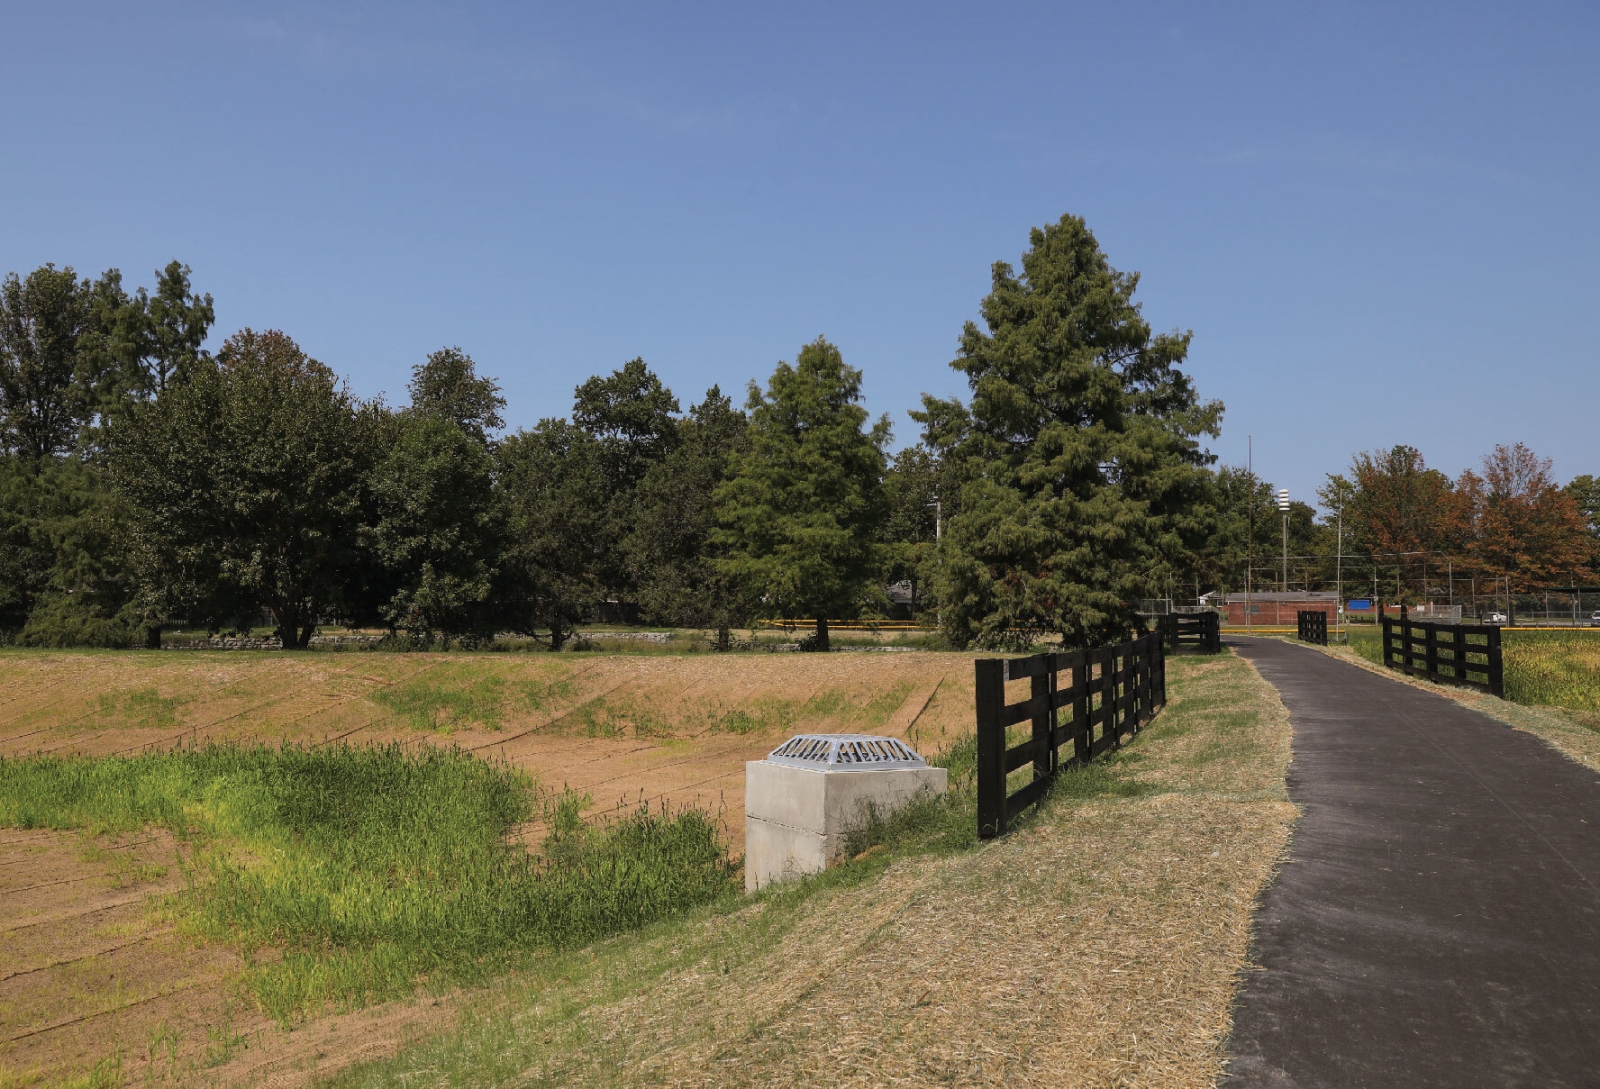 Southland Park improvements, including updated paved trail and detention basins